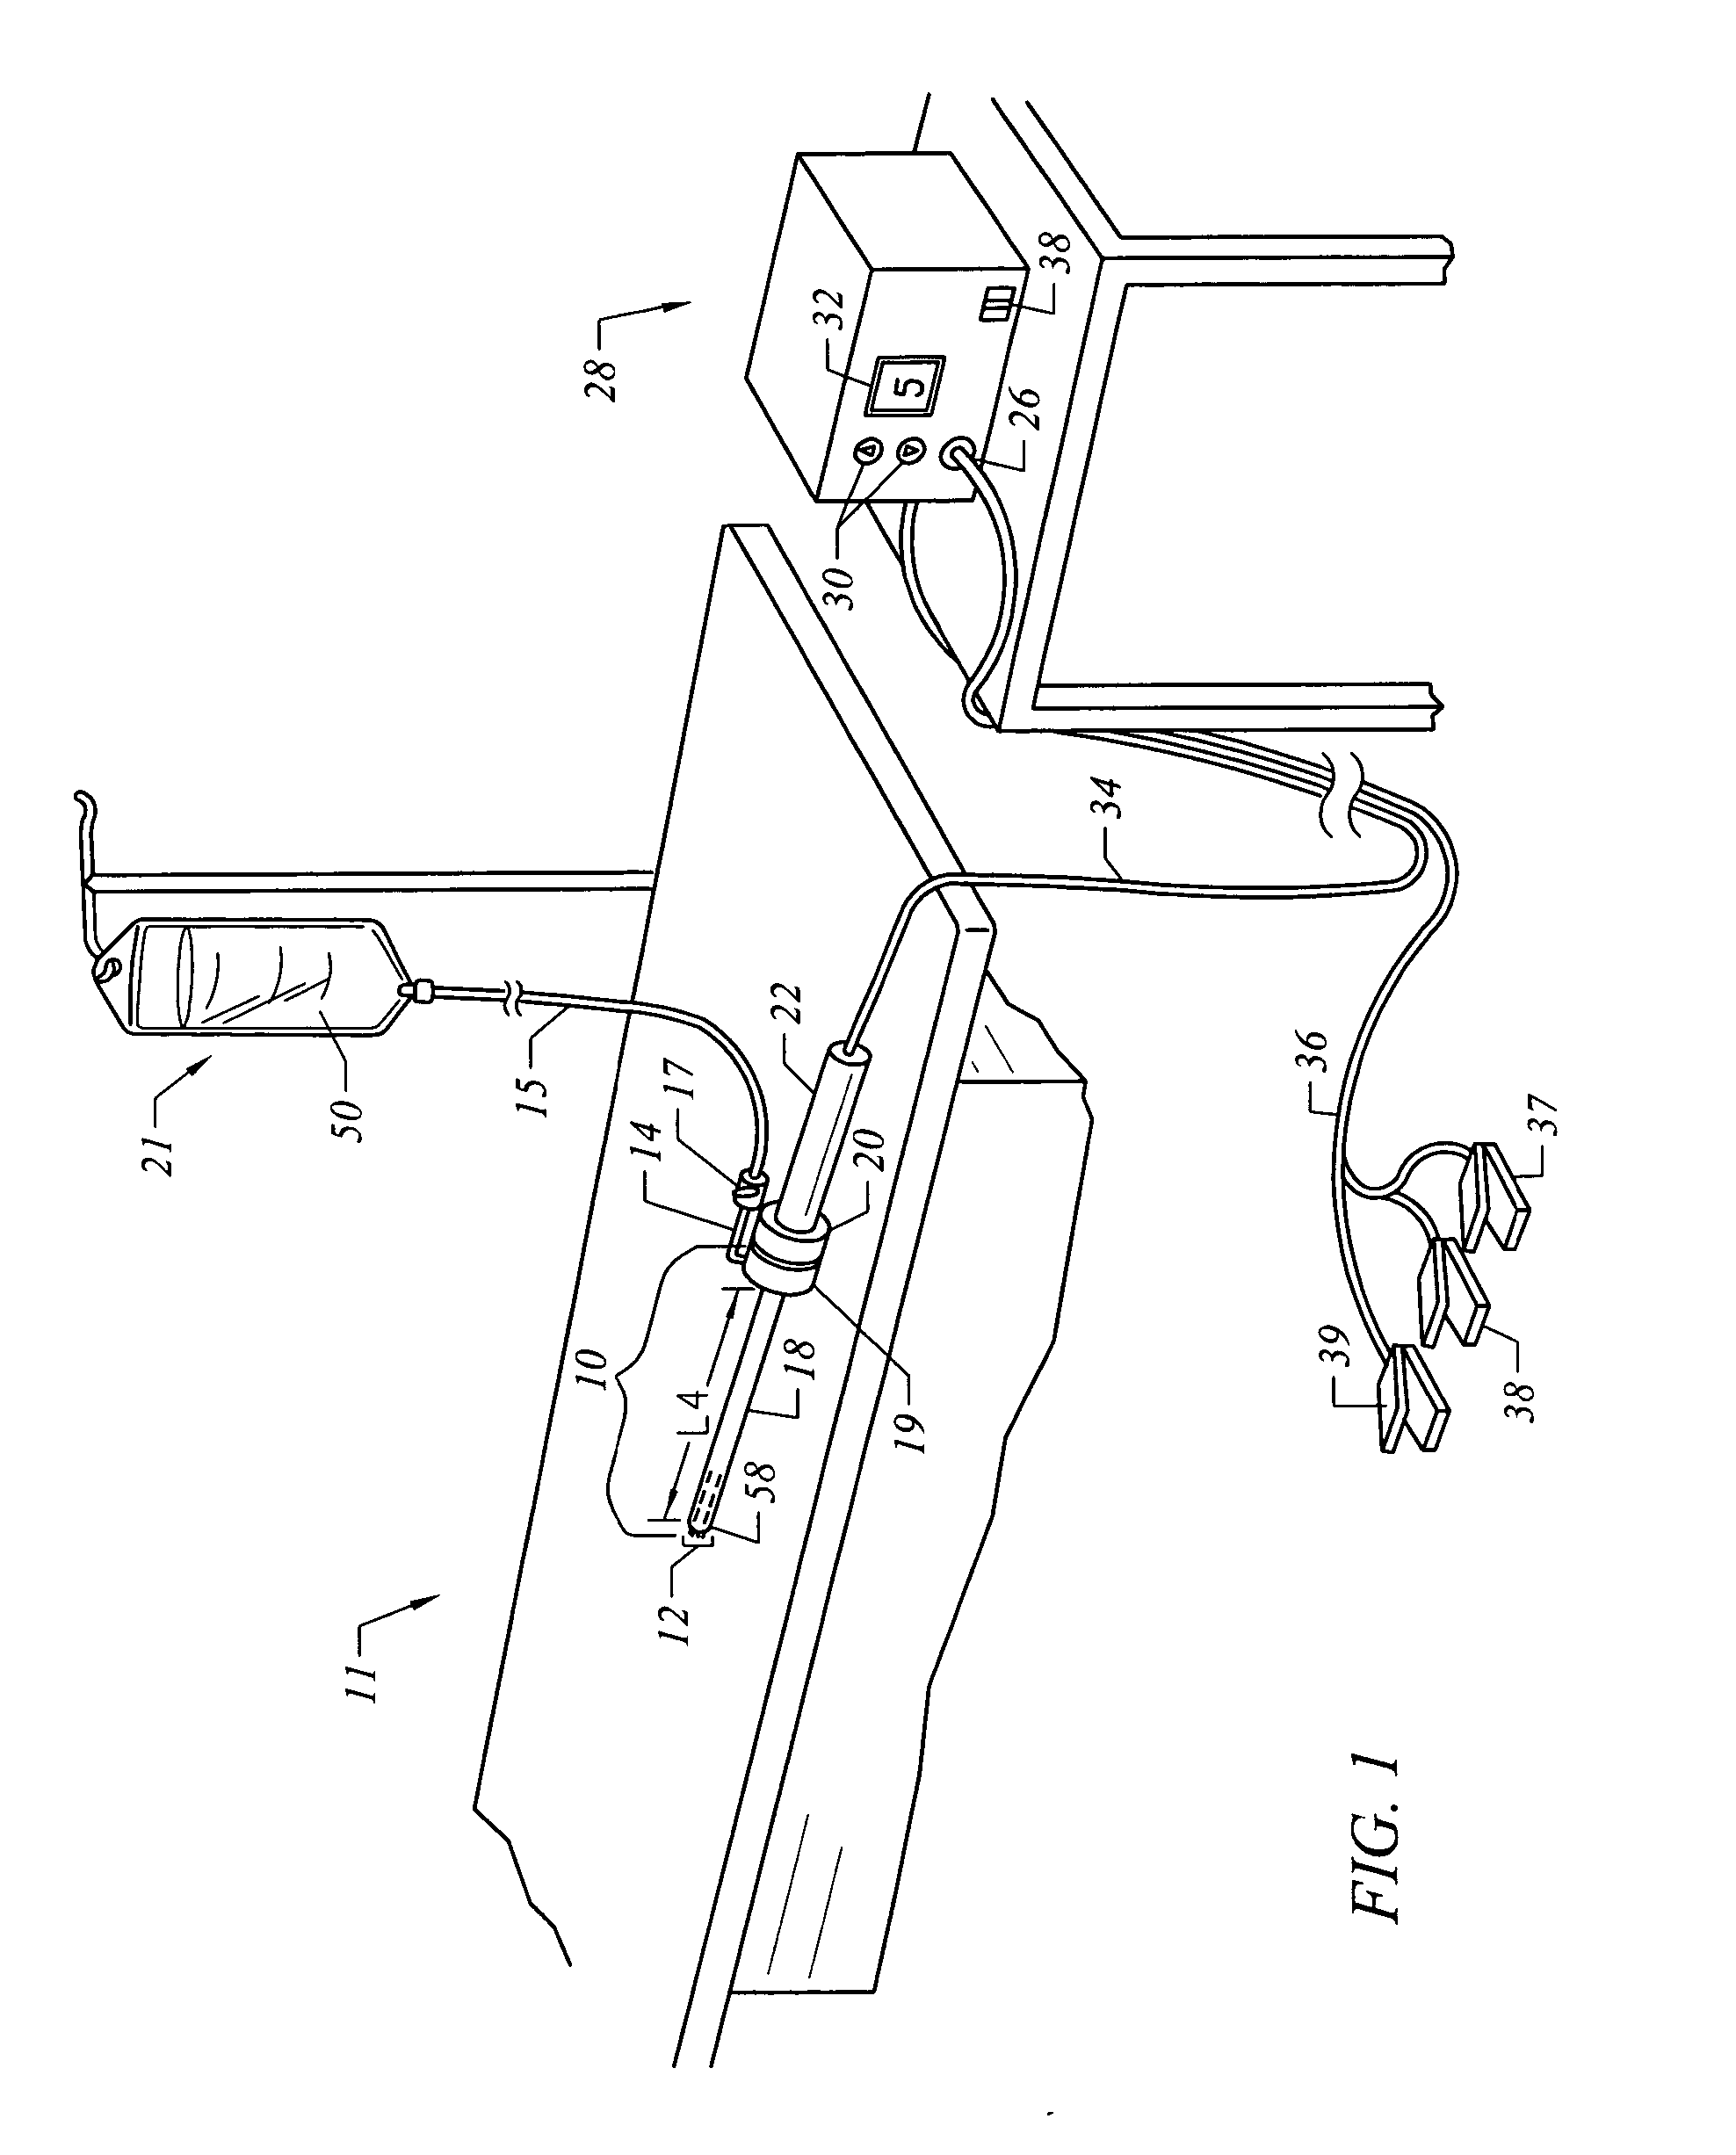 Selectively controlled active electrodes for electrosurgical probe